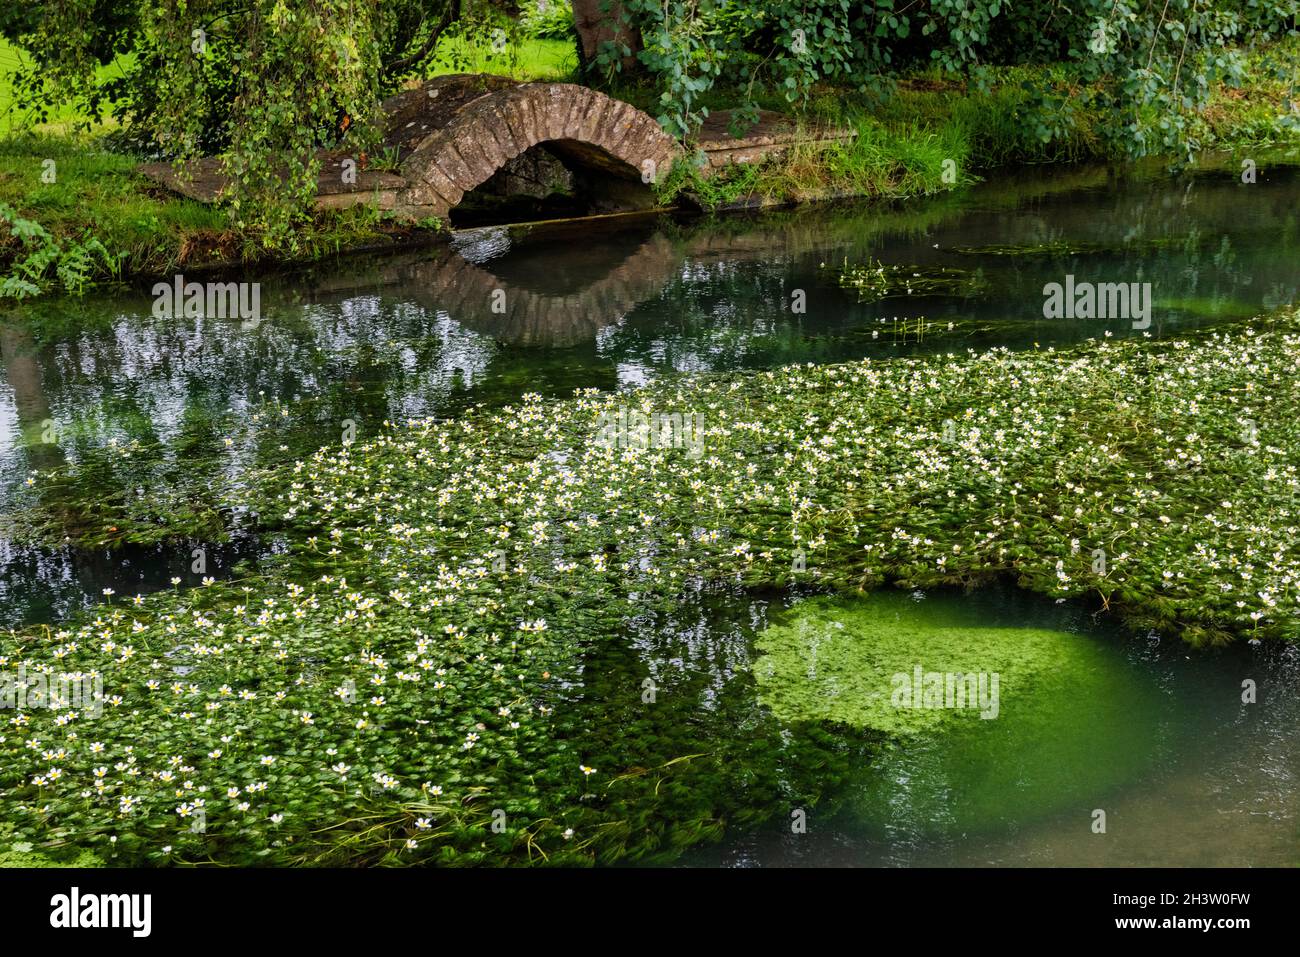 Bourton-on-the-Water and the river Windrush. A village in the rural Cotswolds area of south central England. Stock Photo